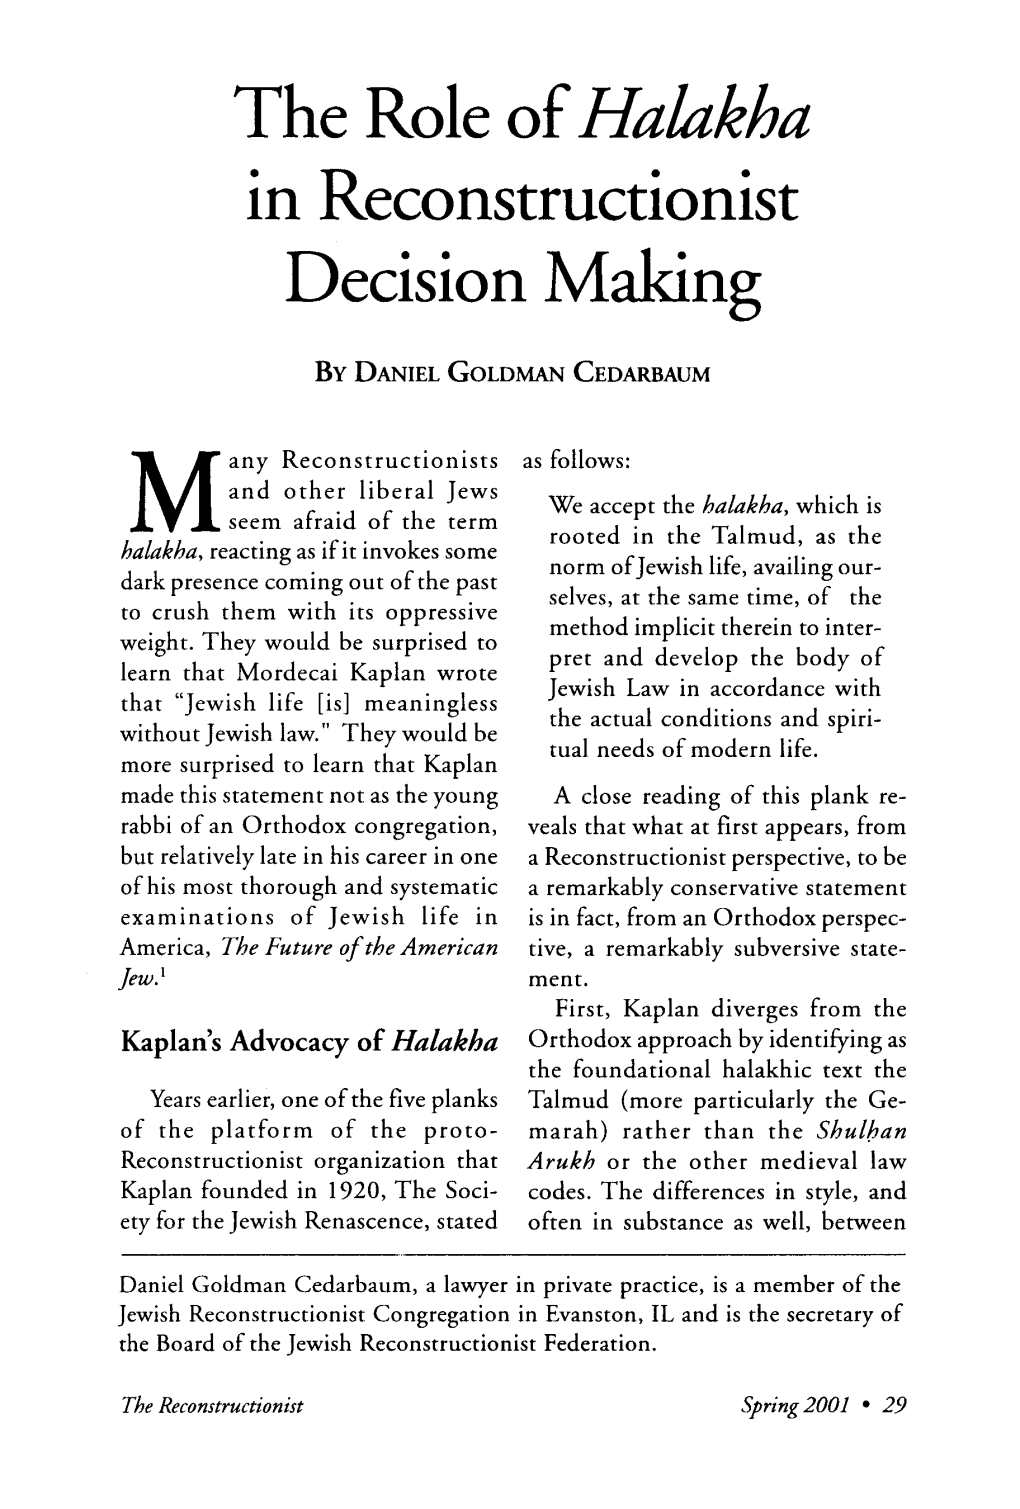 The Role of Hahkba in Reconstructionist Decision Malung